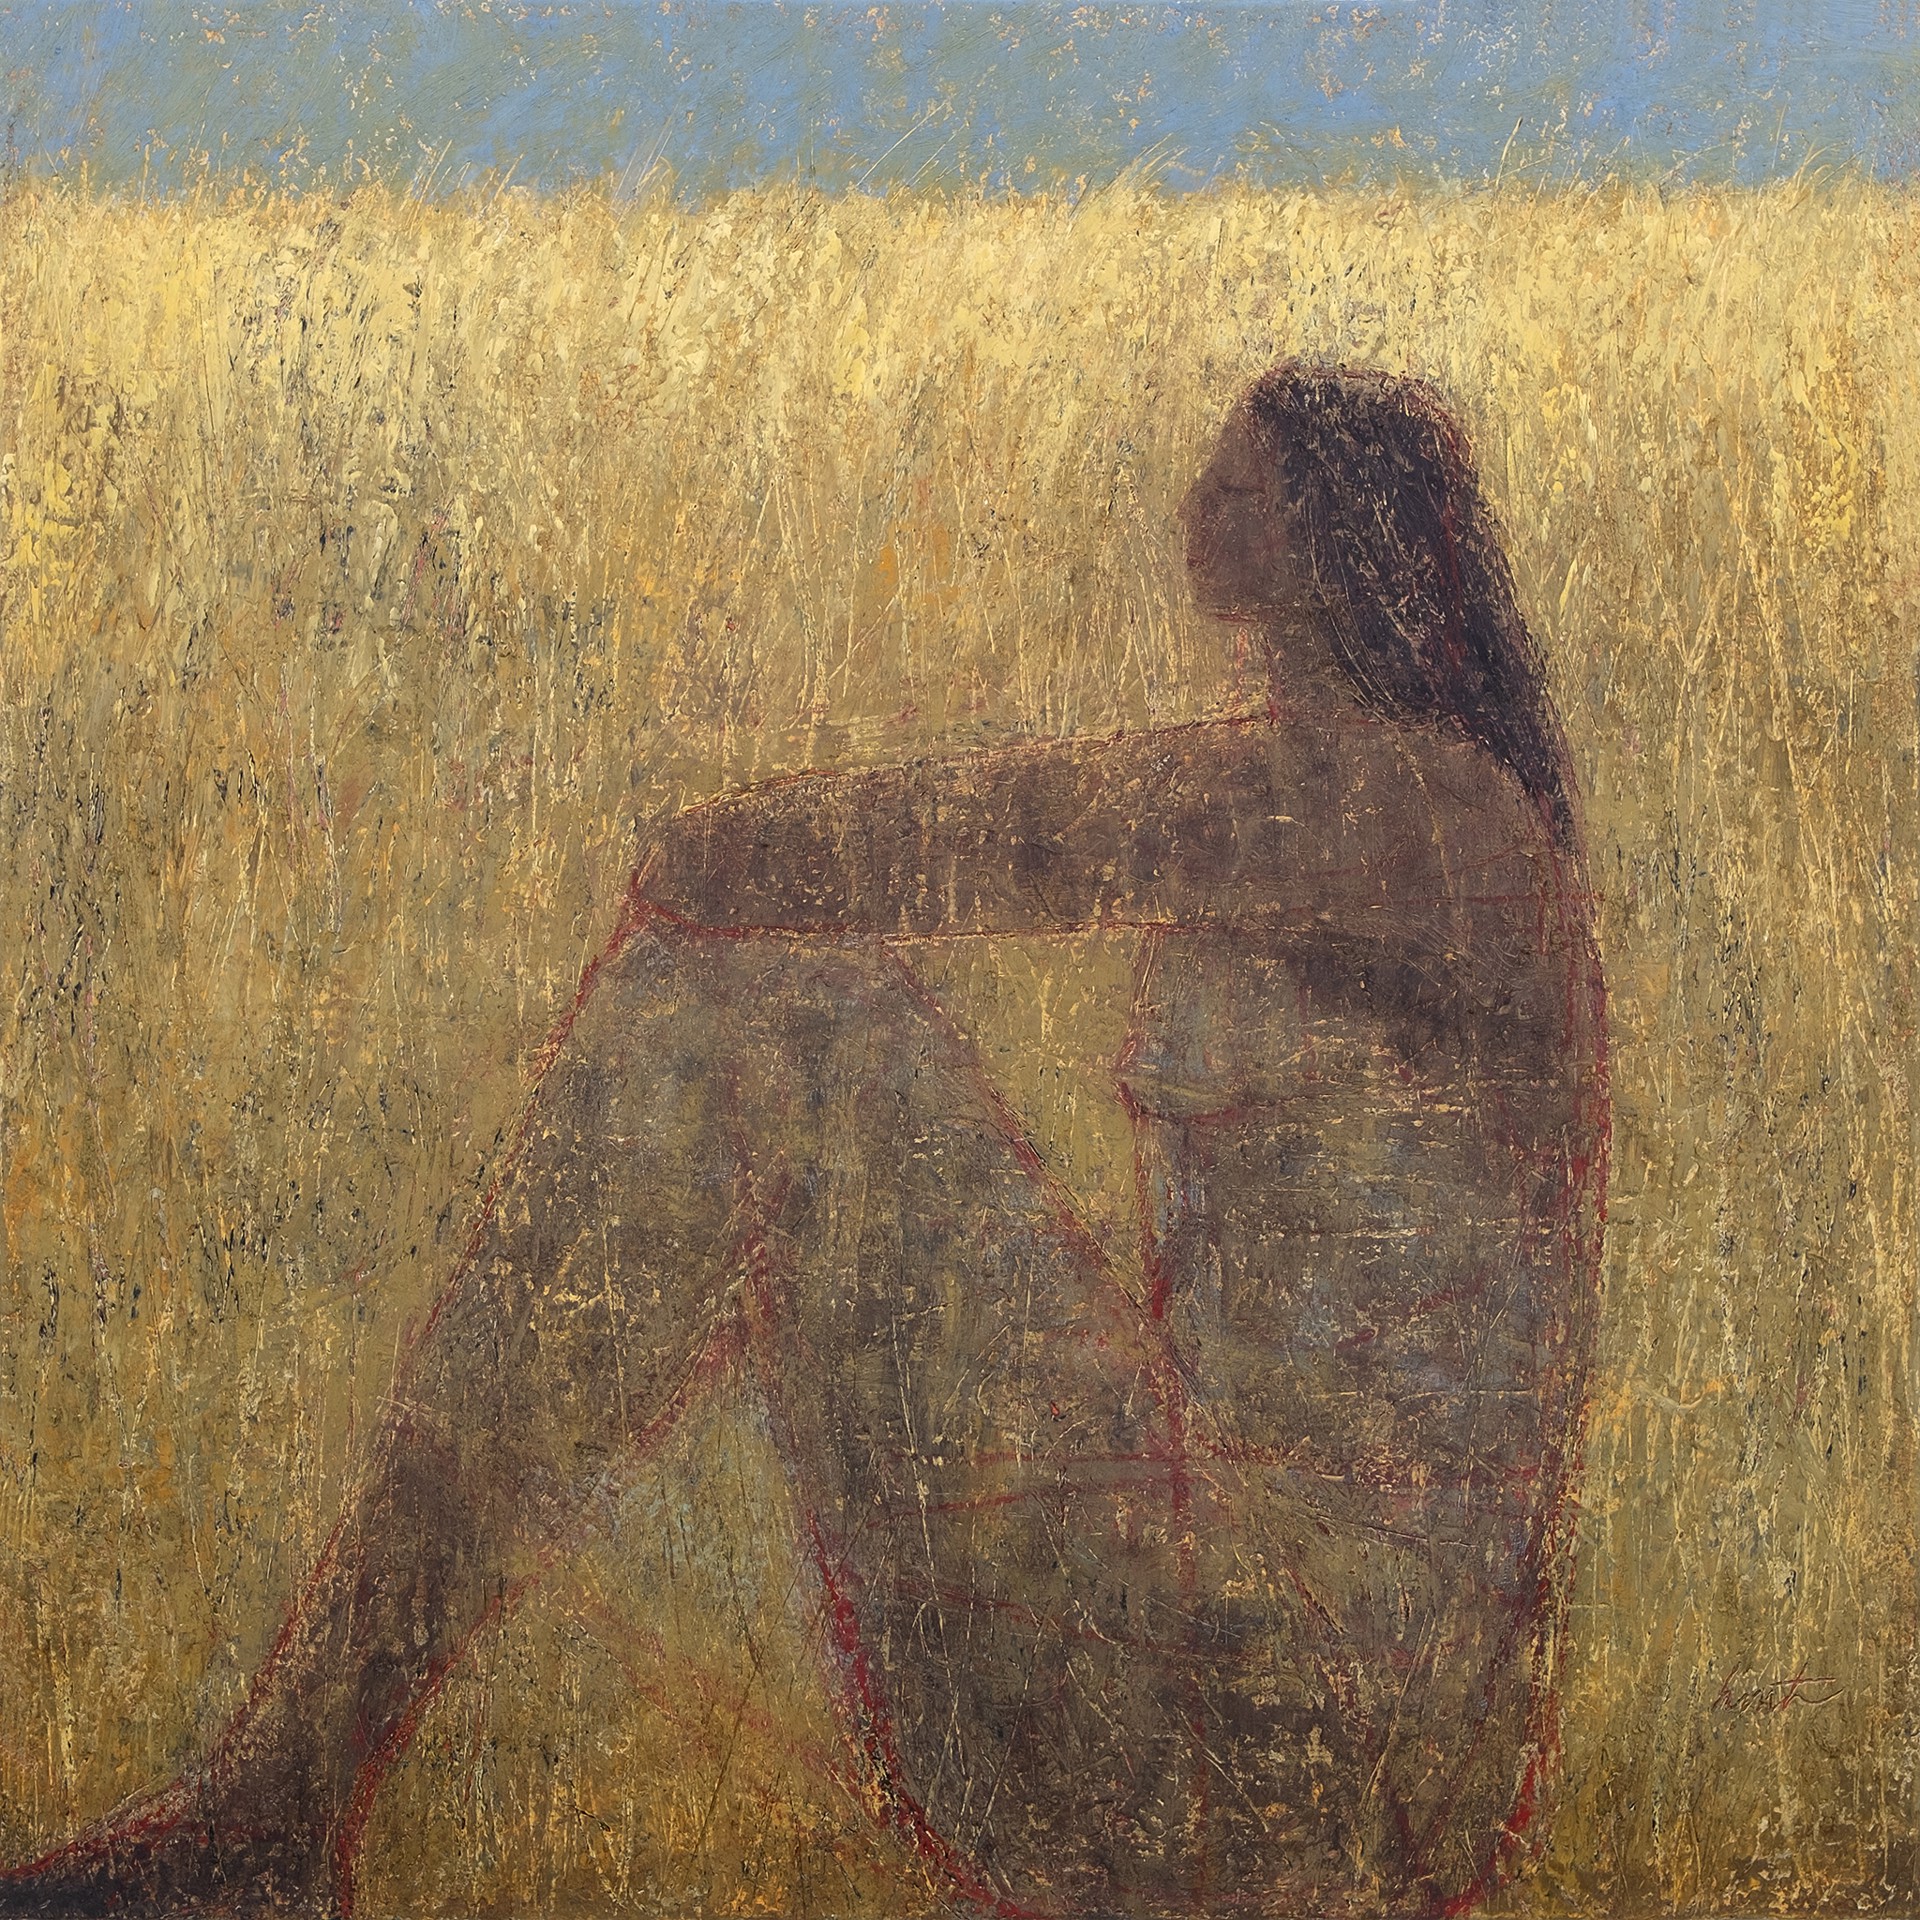 Woman In The Weeds by Ruth Hunter